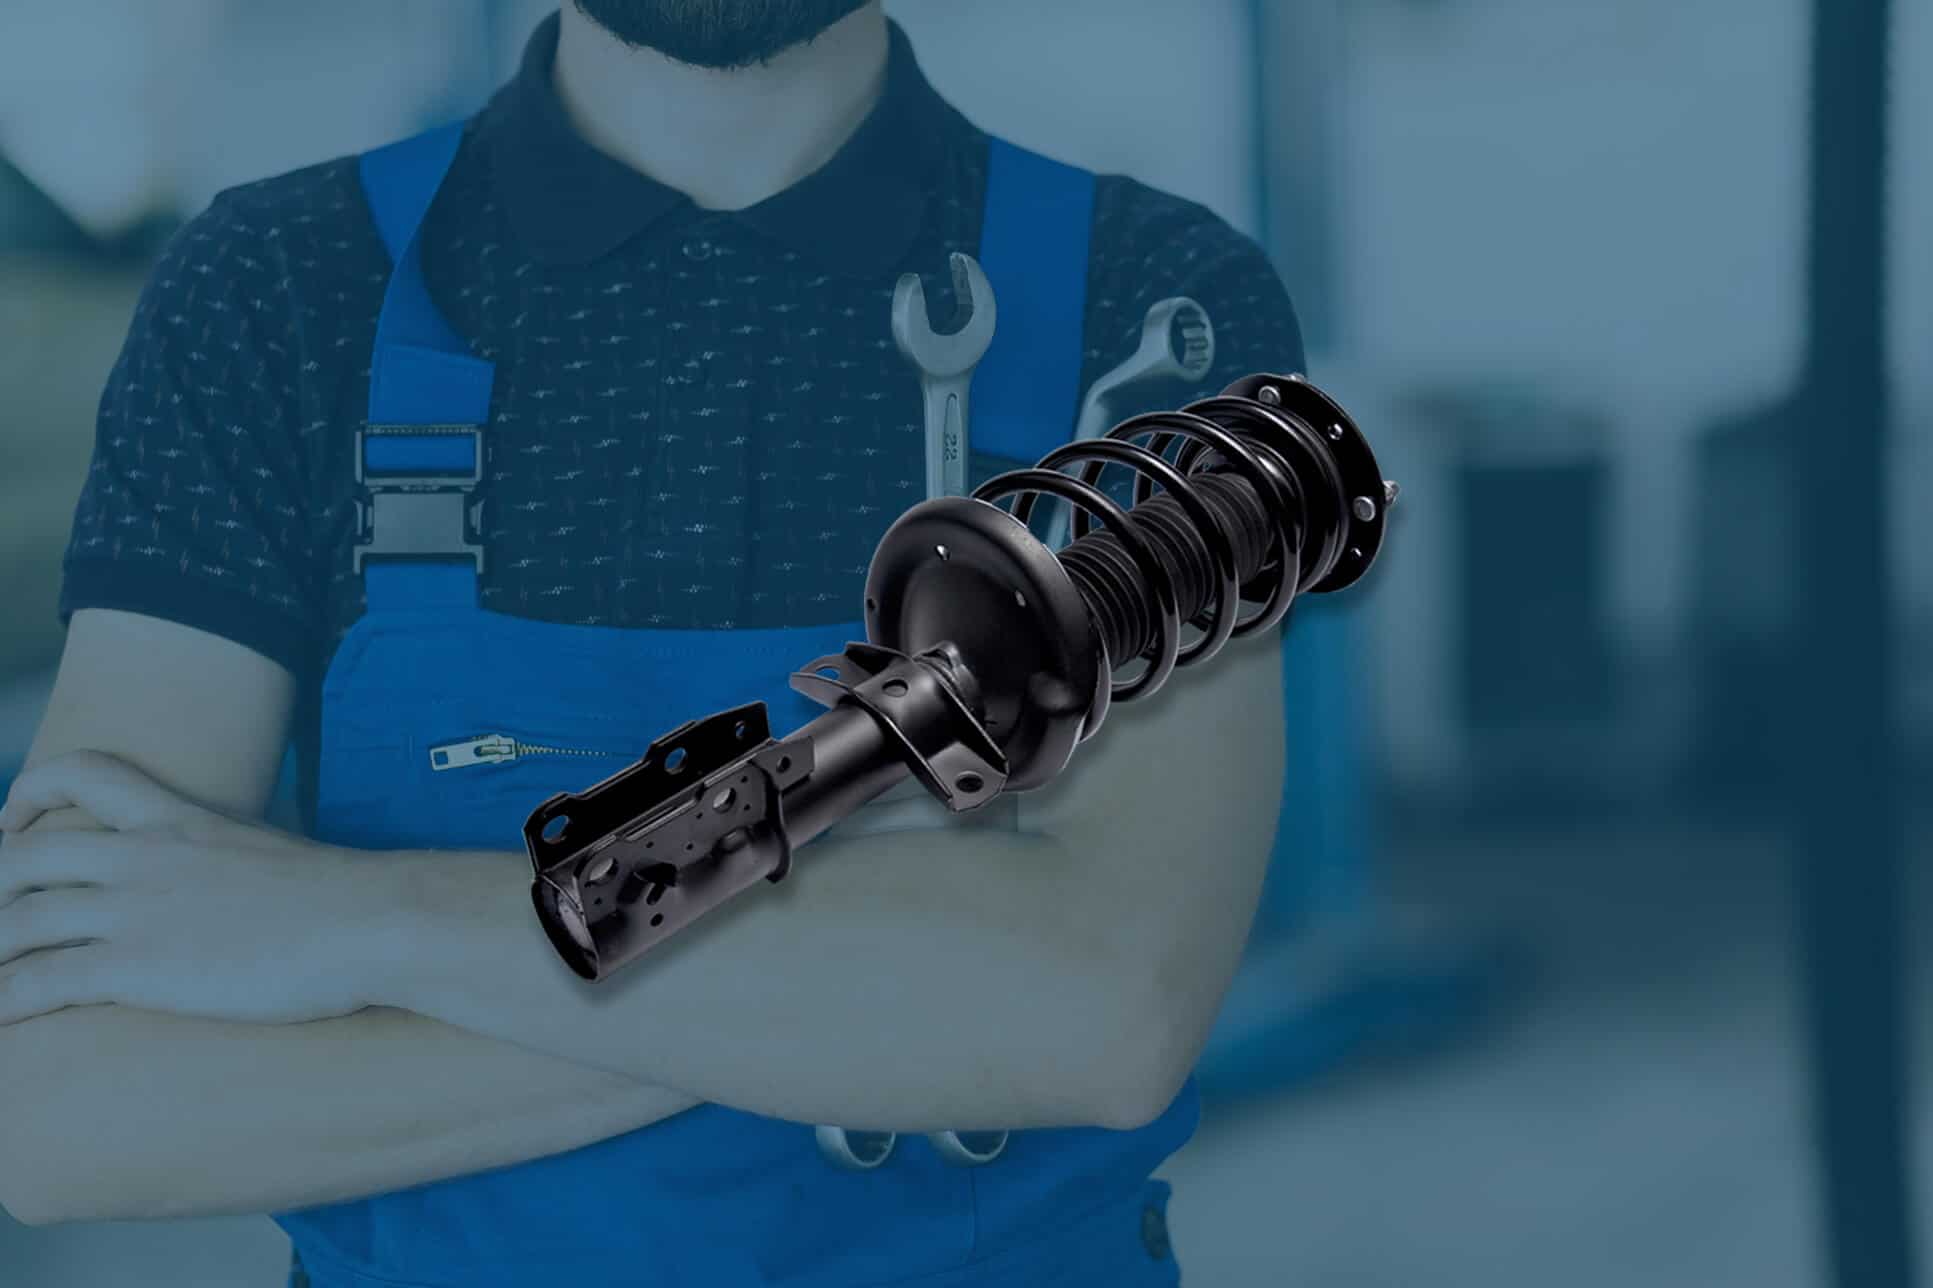 DIY vs. Professional Help When to Call a Mobile Mechanic for Your Shock Absorber and Struts